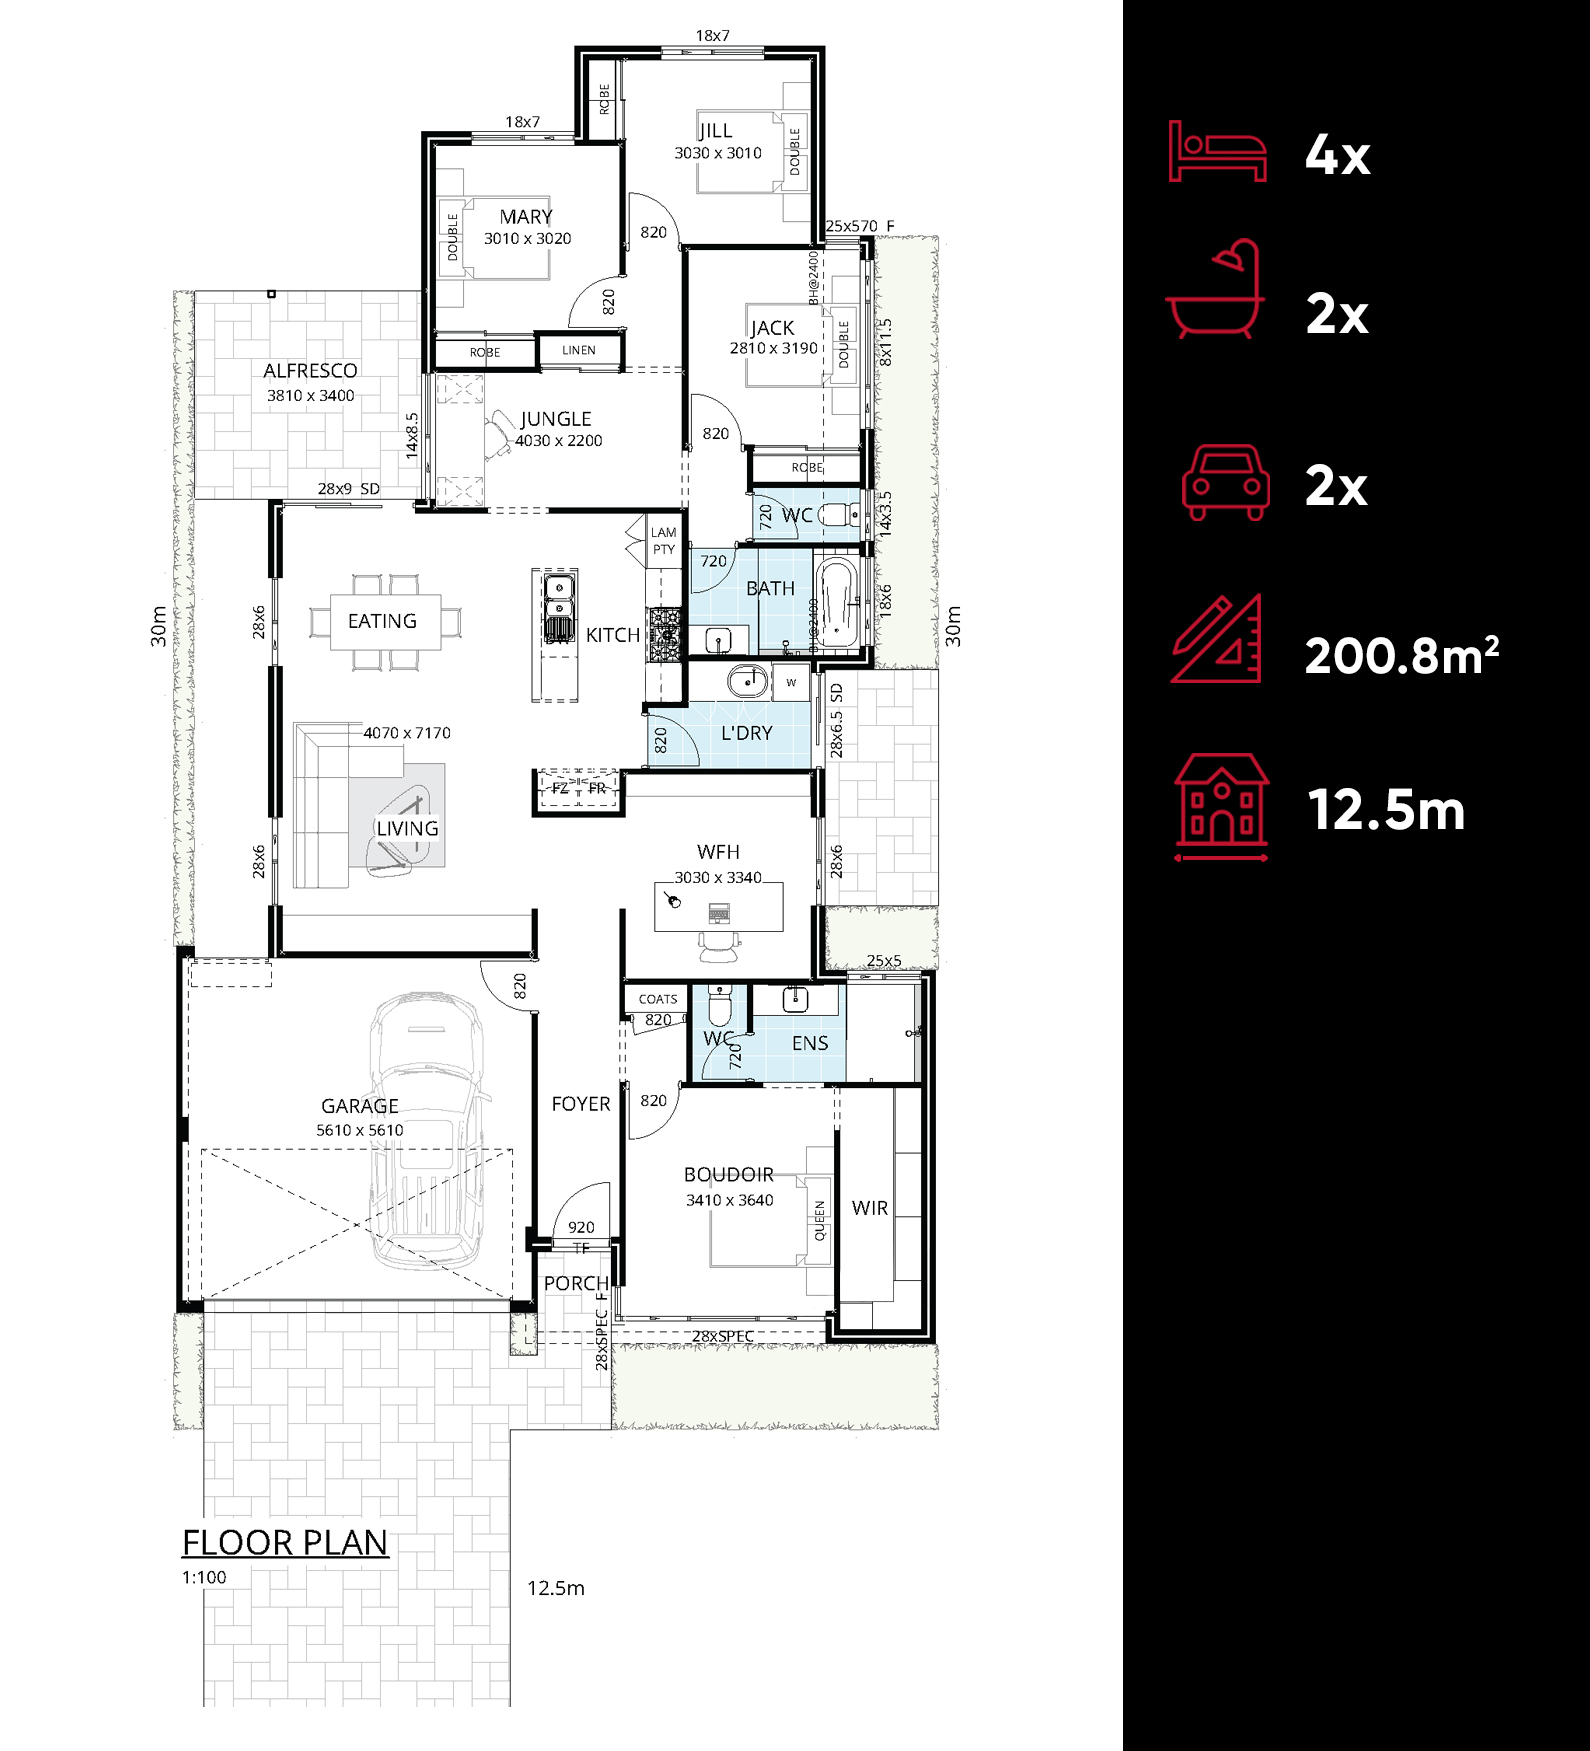 The out of office floorplan